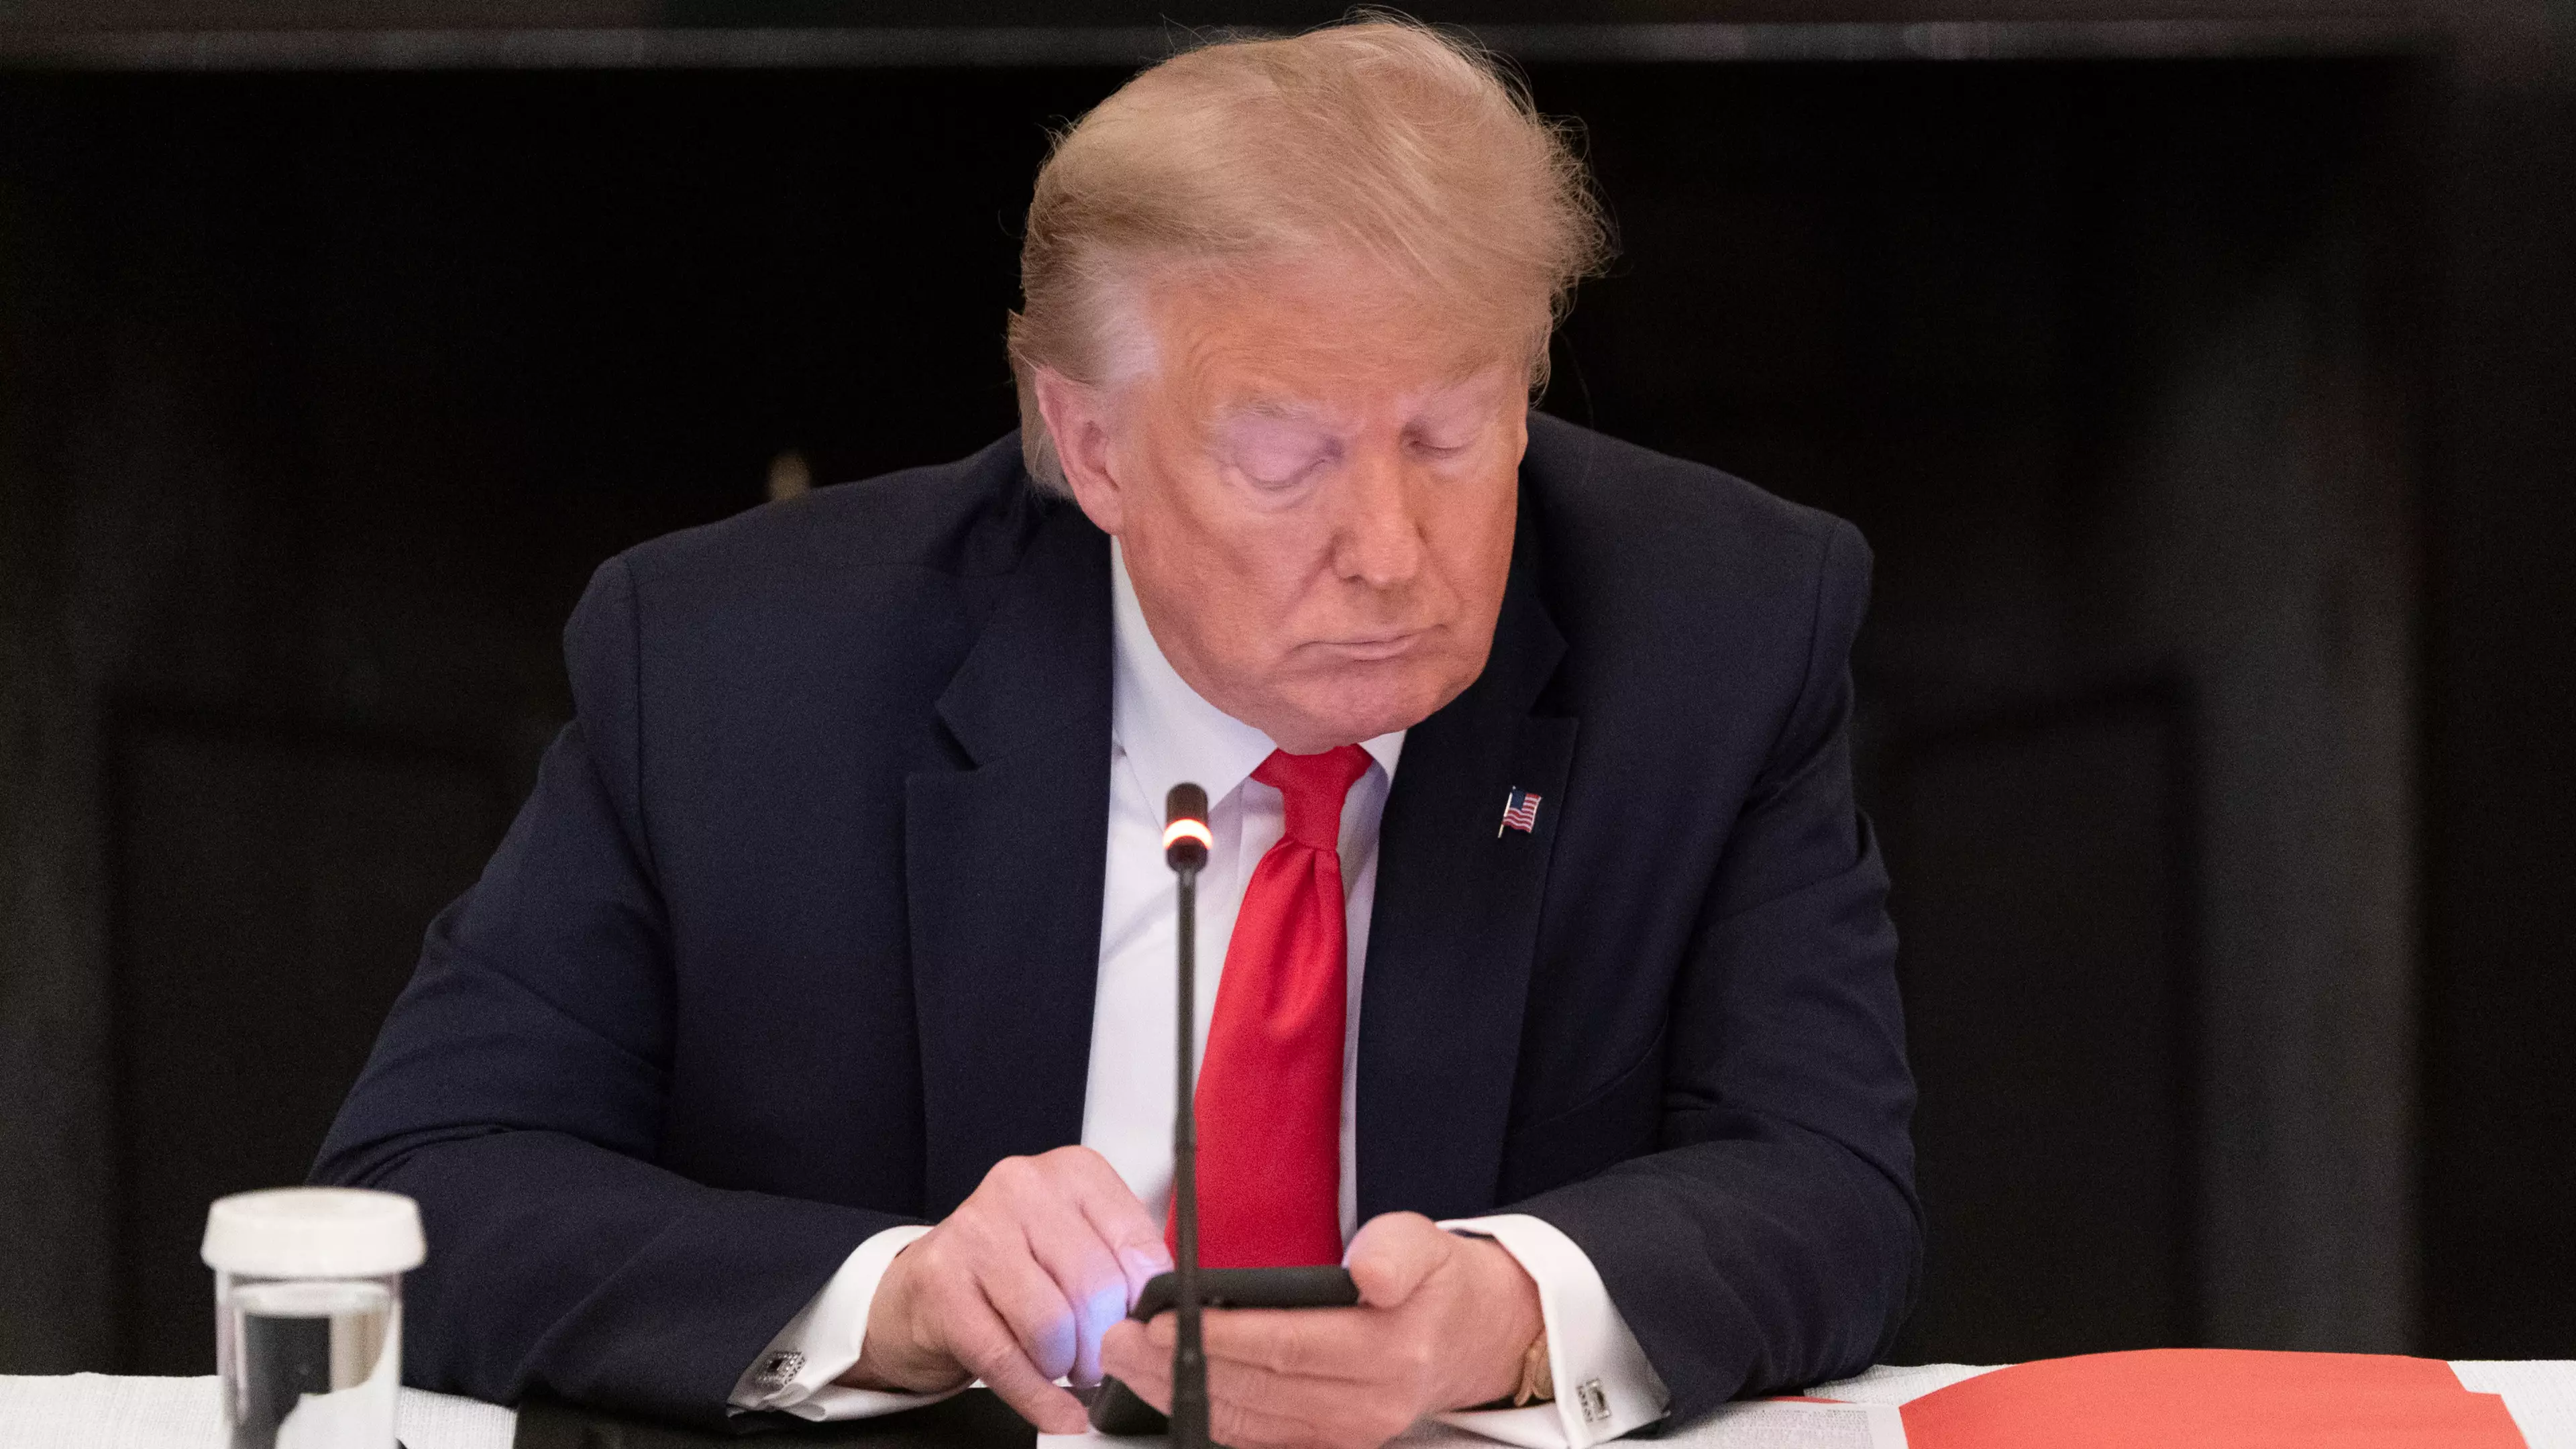 Man Claims He Logged Into Donald Trump's Twitter By Guessing Password 